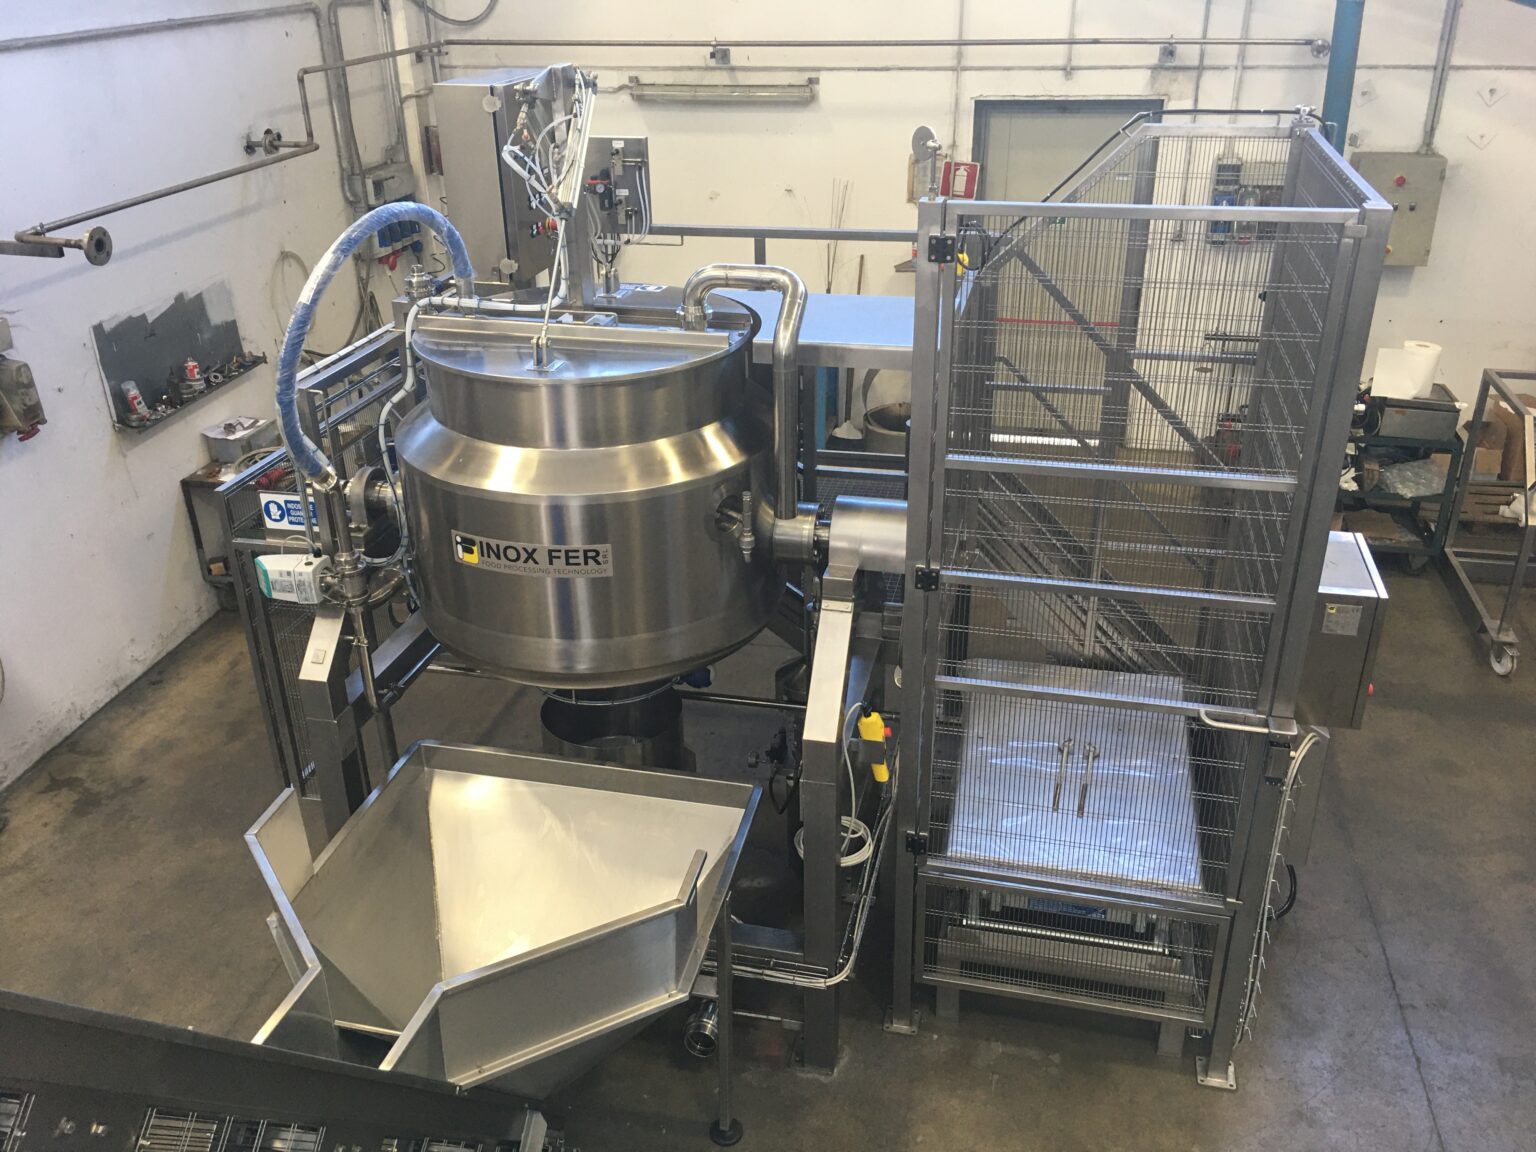 Industrial cooking kettle for cream preparation - Case Study